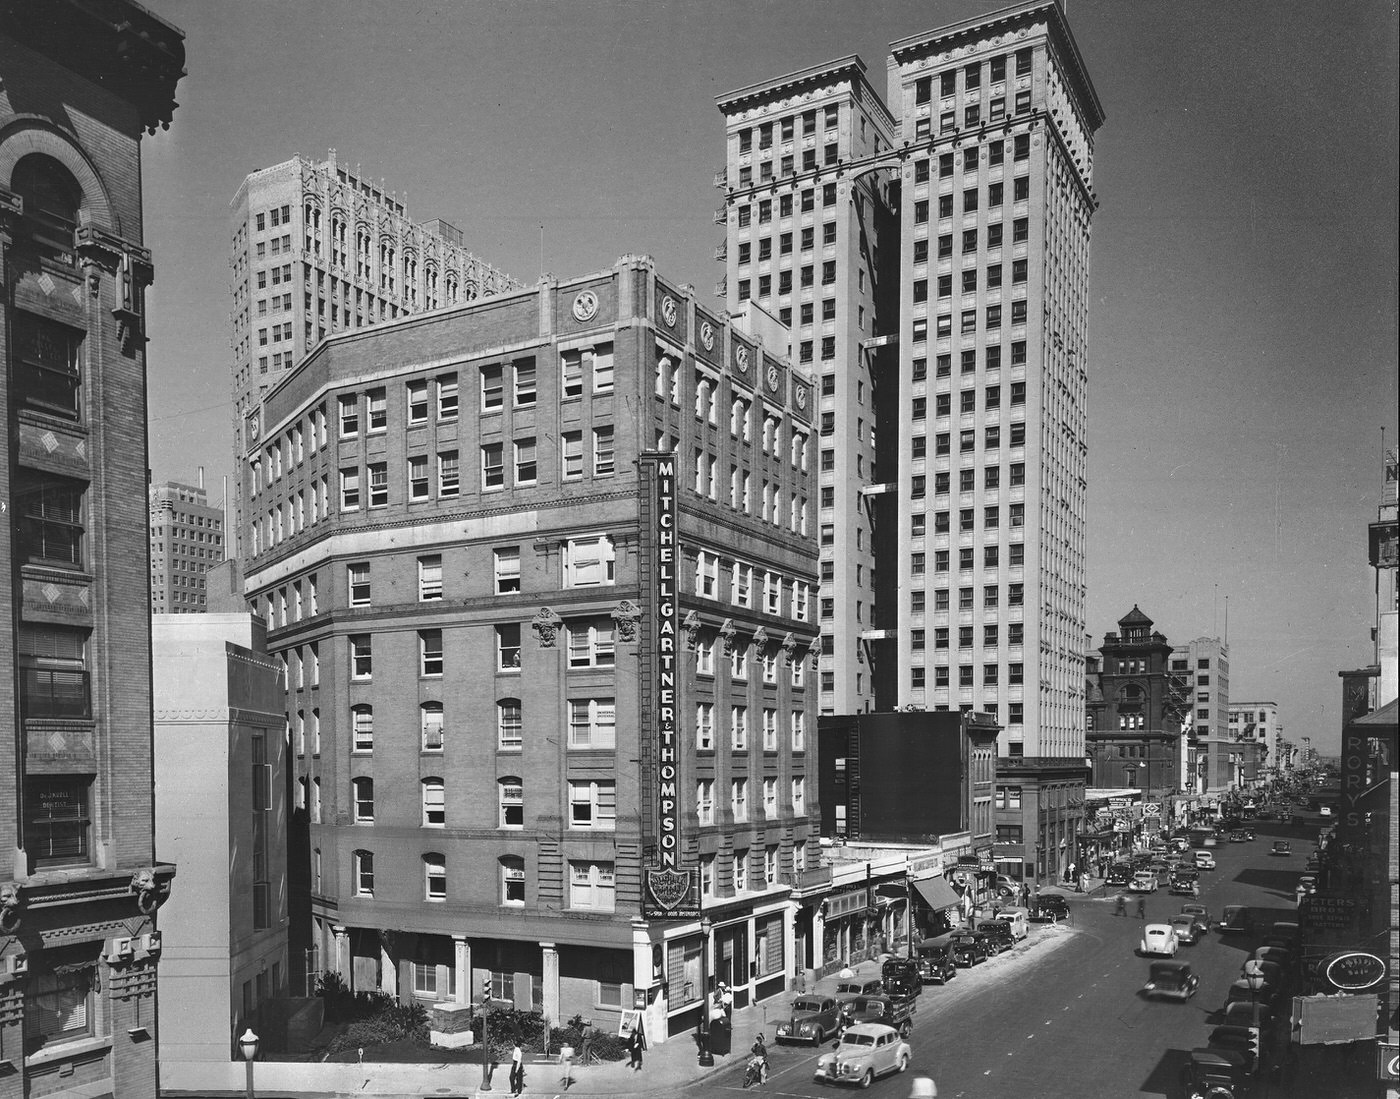 Mitchell, Gartner & Thompson Insurance building and the W. T. Waggoner building, Fort Worth, Texas, 1942